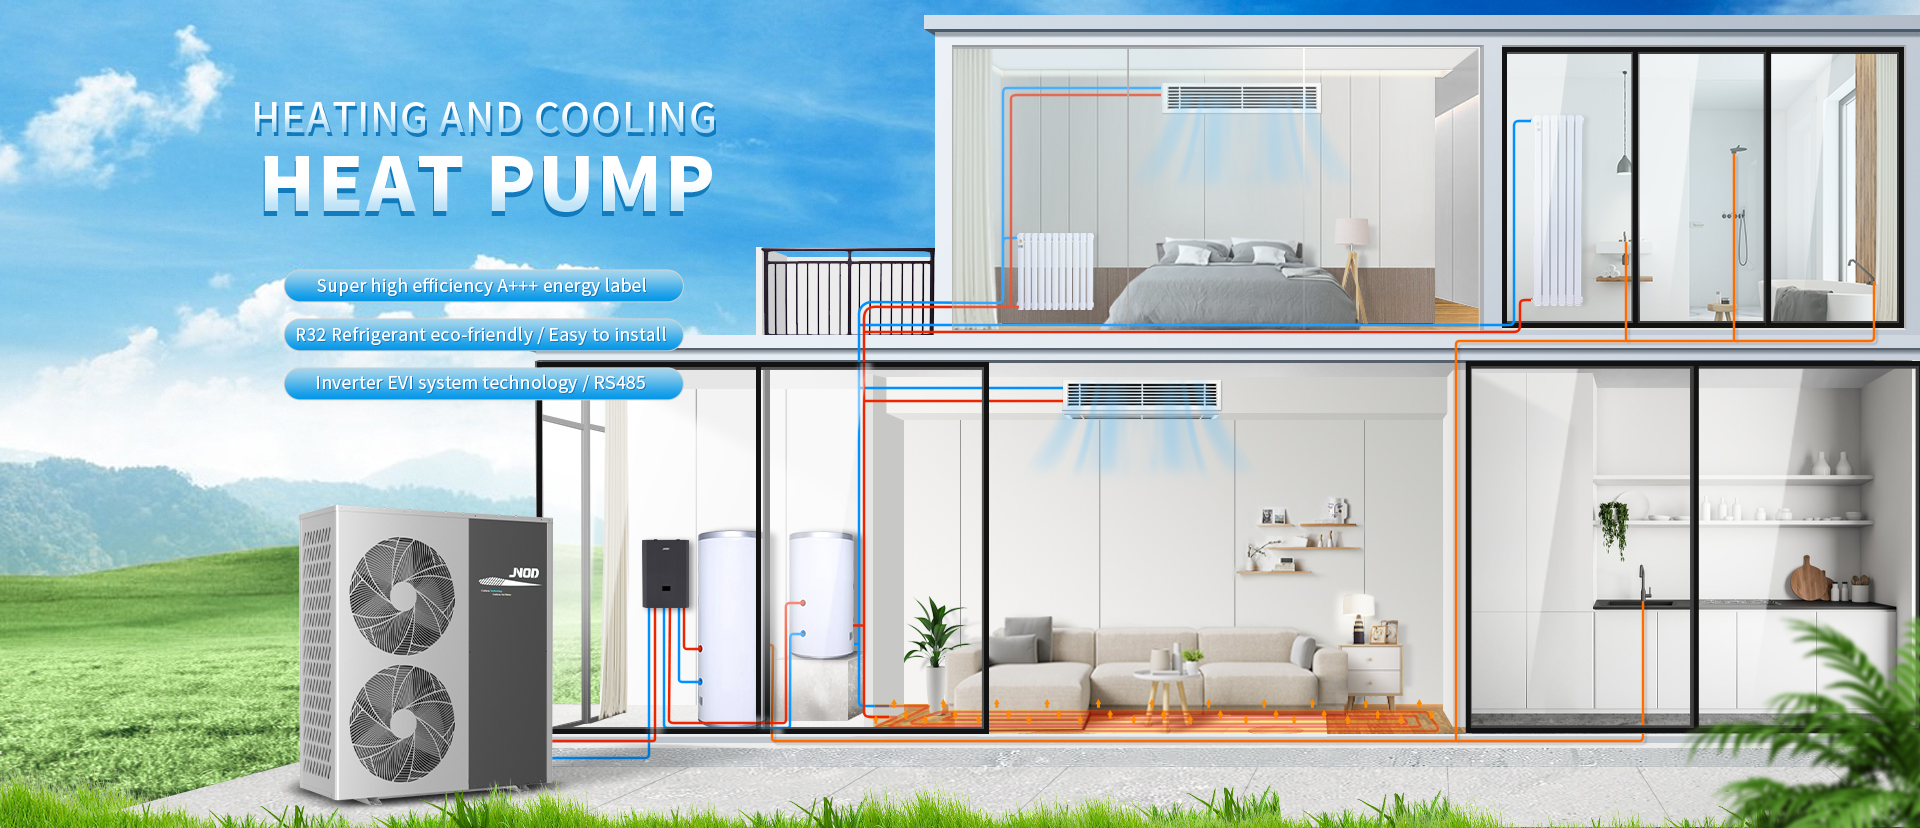 Heating And Cooling Heat Pump recommend